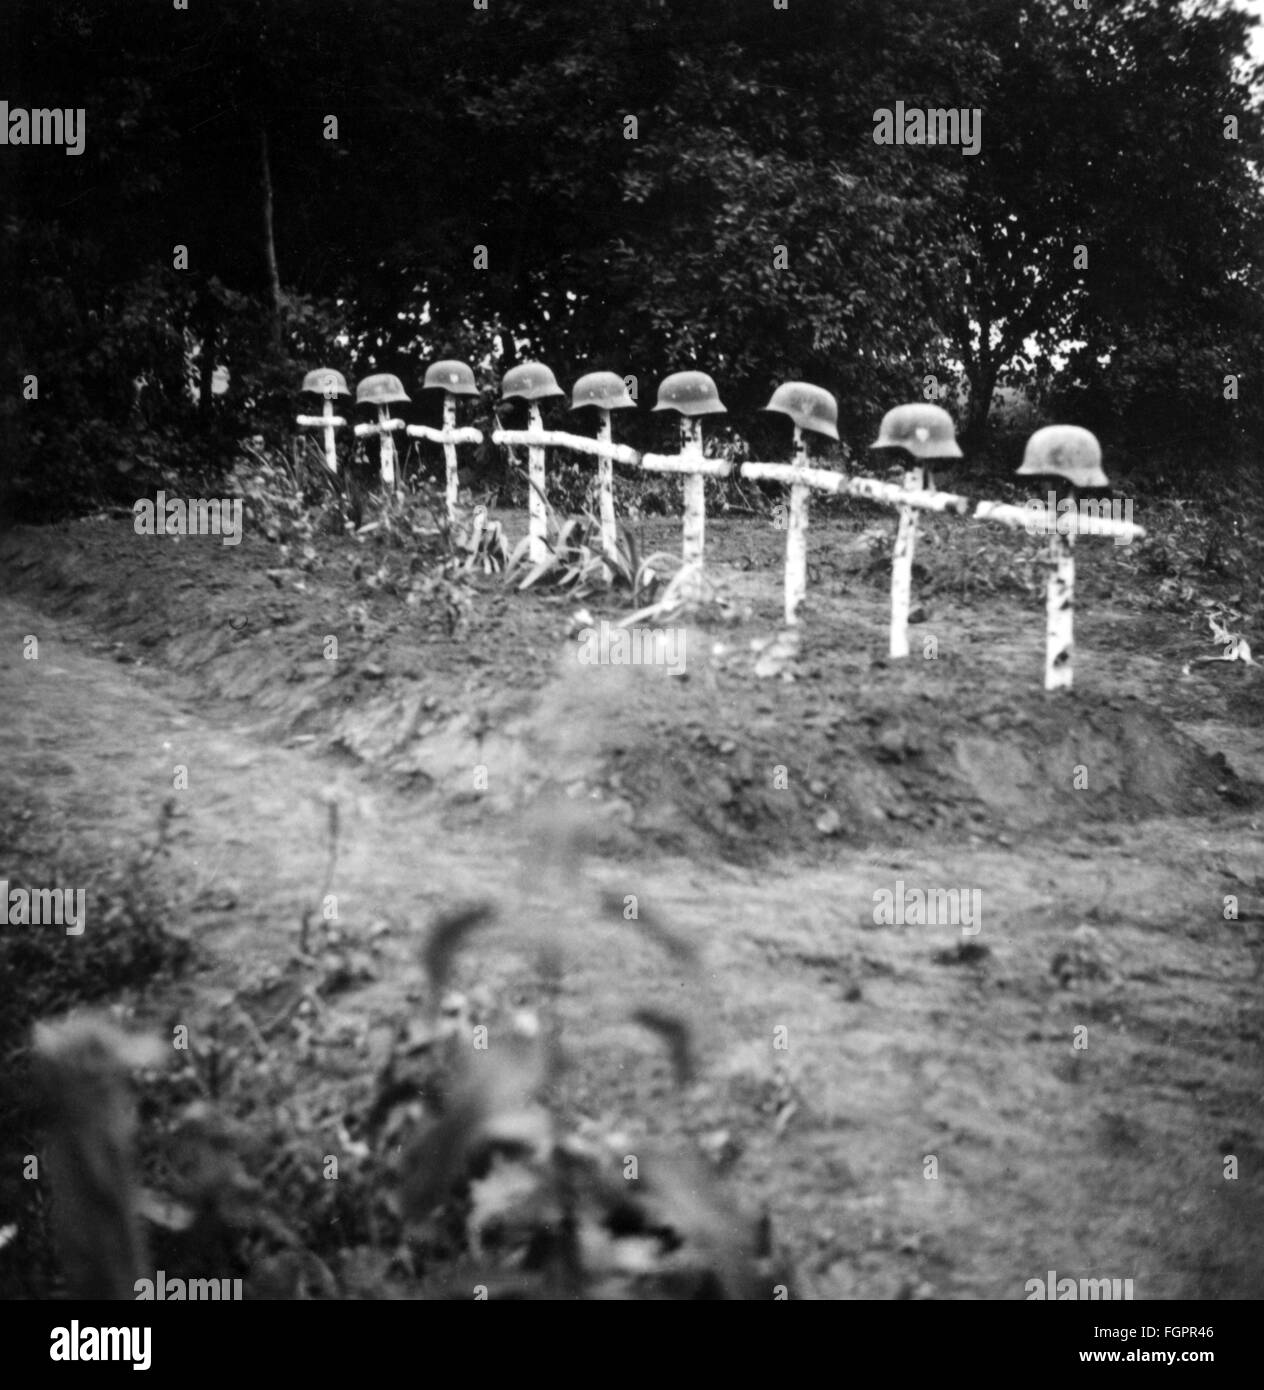 Second World War / WWII, Soviet Union, summer 1941, German military graves, photo taken by a member of a Reichsarbeitsdienst (Reich Labor Service) unit deployed on the Eastern Front (RAD Abteilung K. 1/130), Army Group South, Ukraine, Additional-Rights-Clearences-Not Available Stock Photo